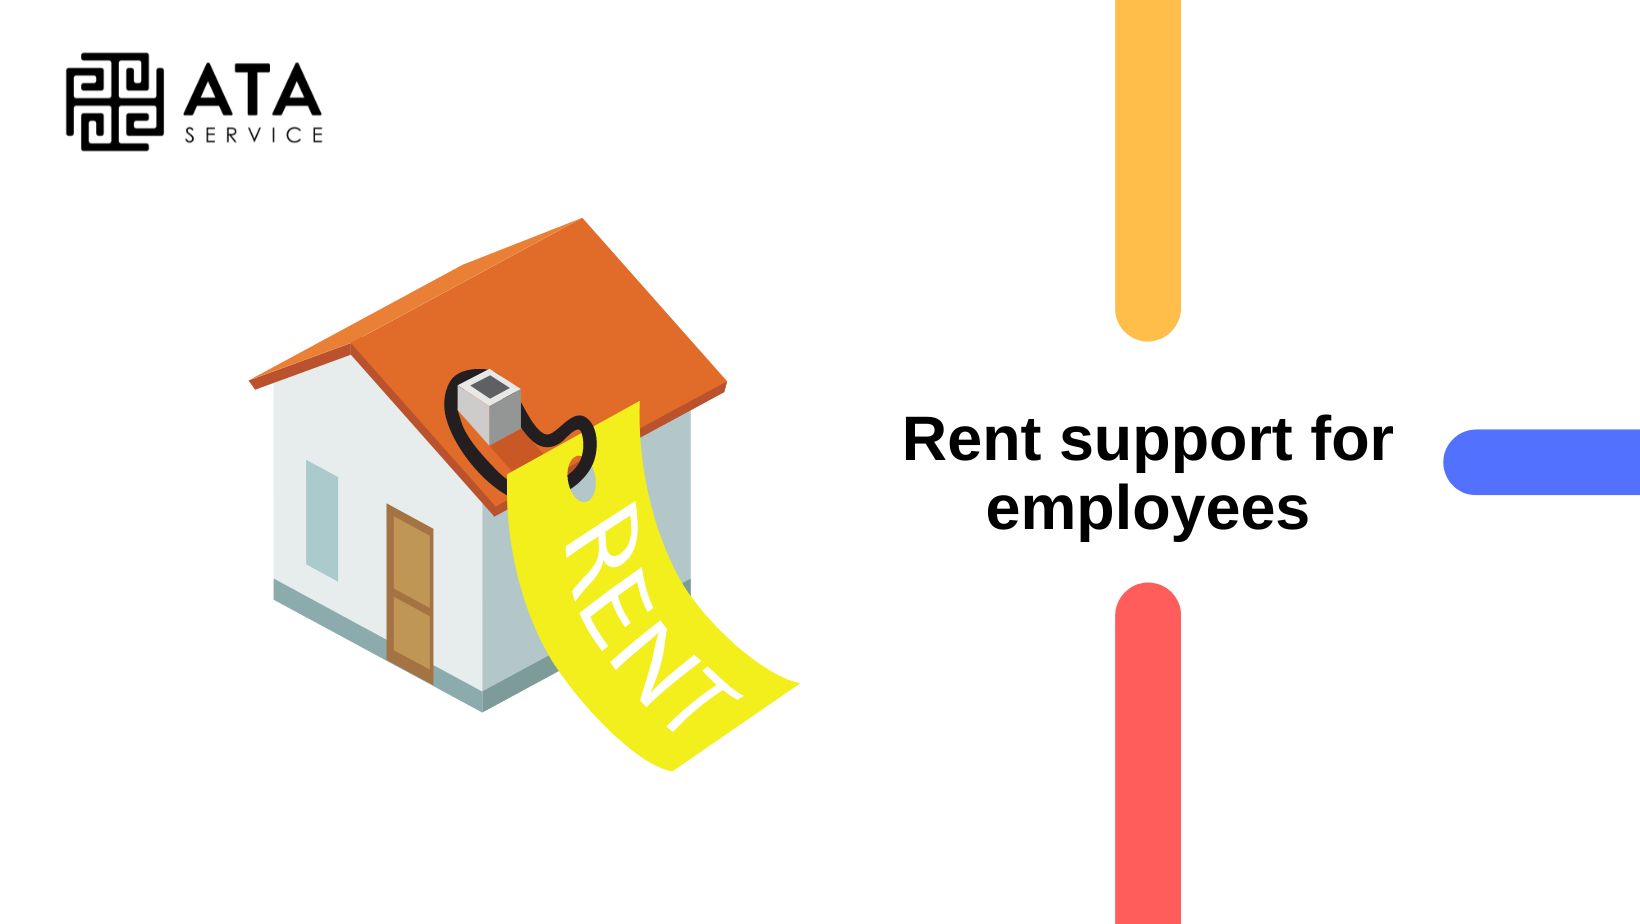 RENT SUPPORT FOR EMPLOYEES